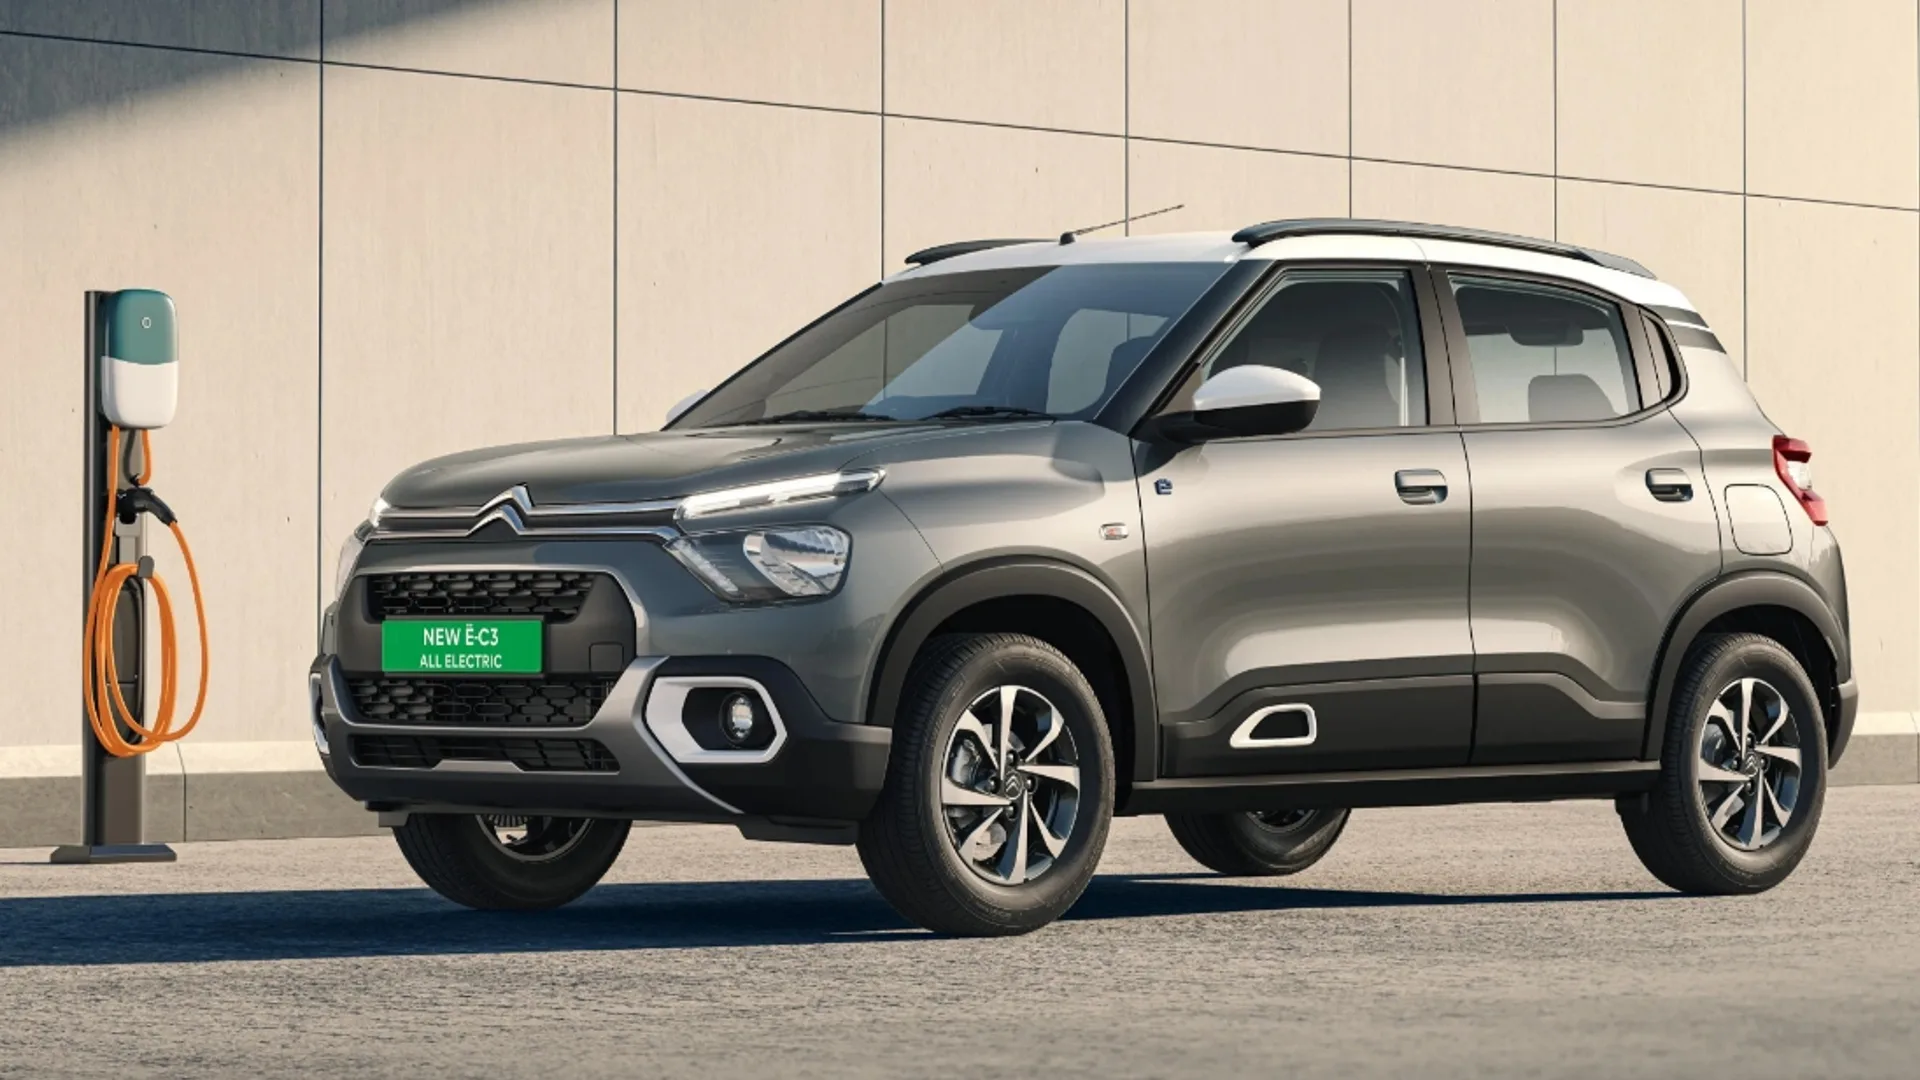 Citroën becomes the first global automaker to export Made-in-India EVs. (Source: Citroën India)